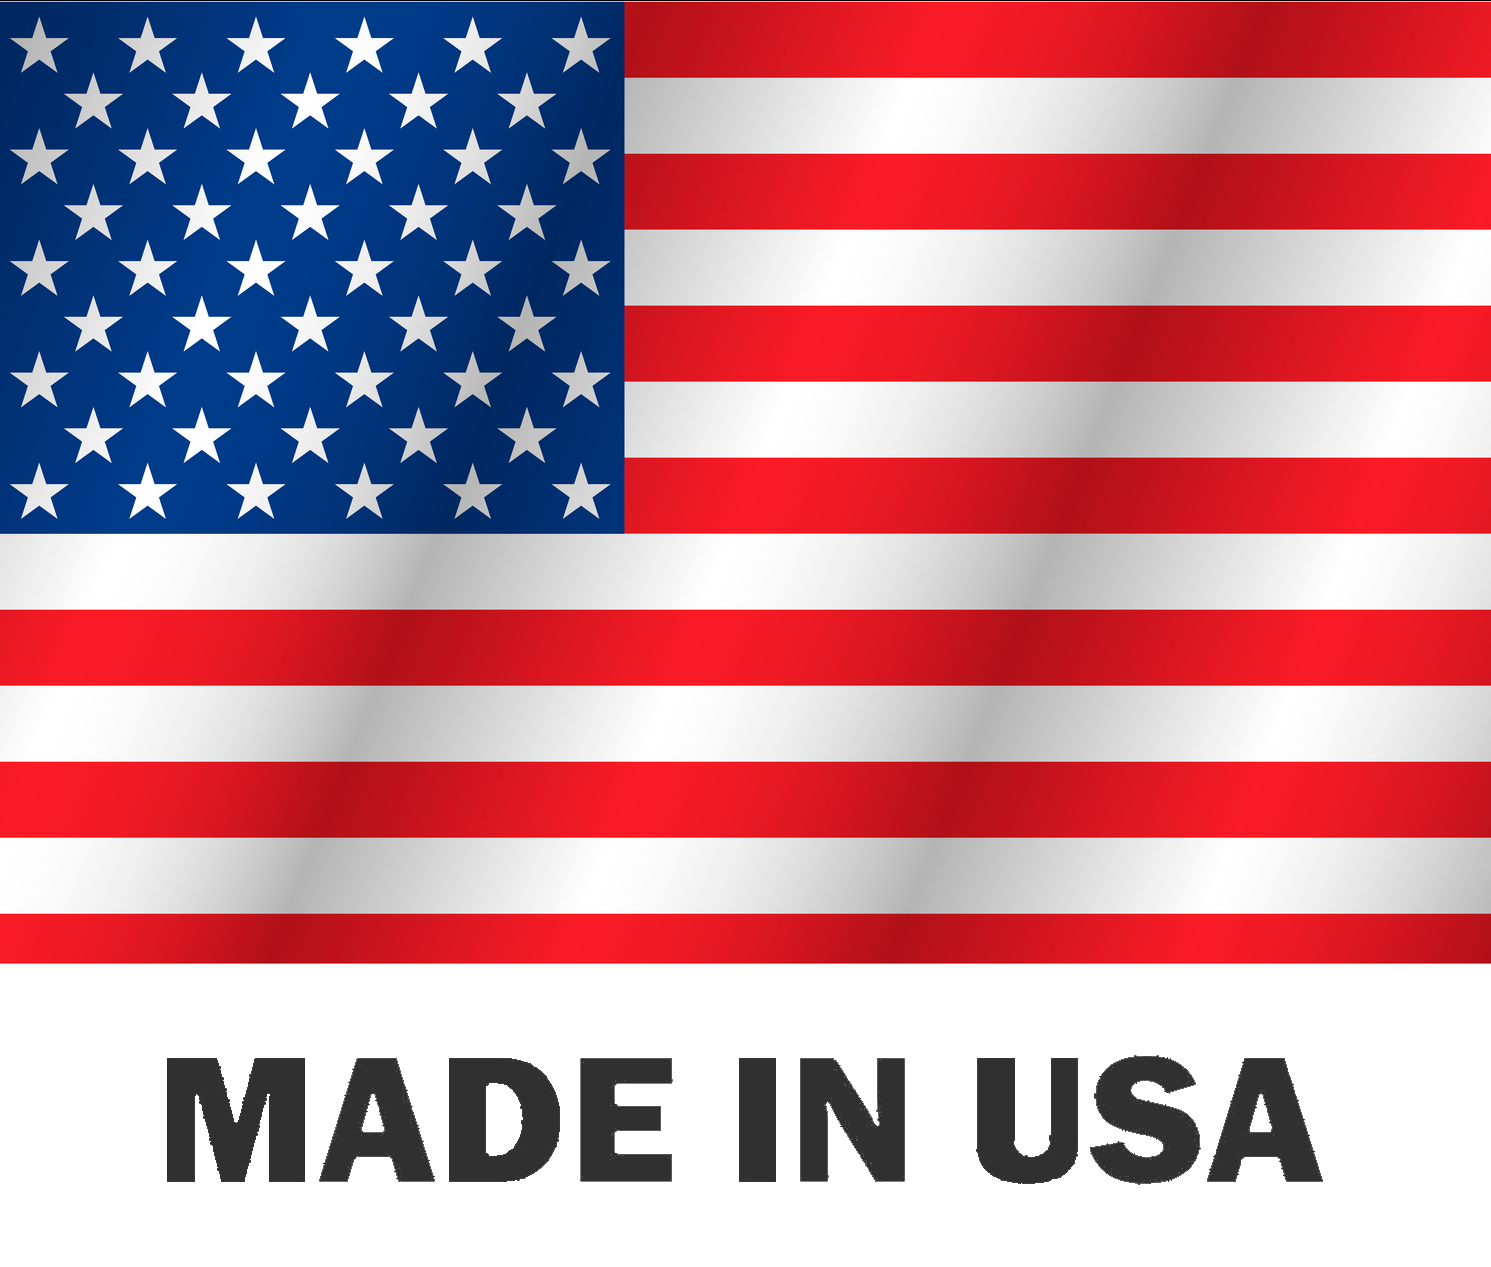 Product of USA